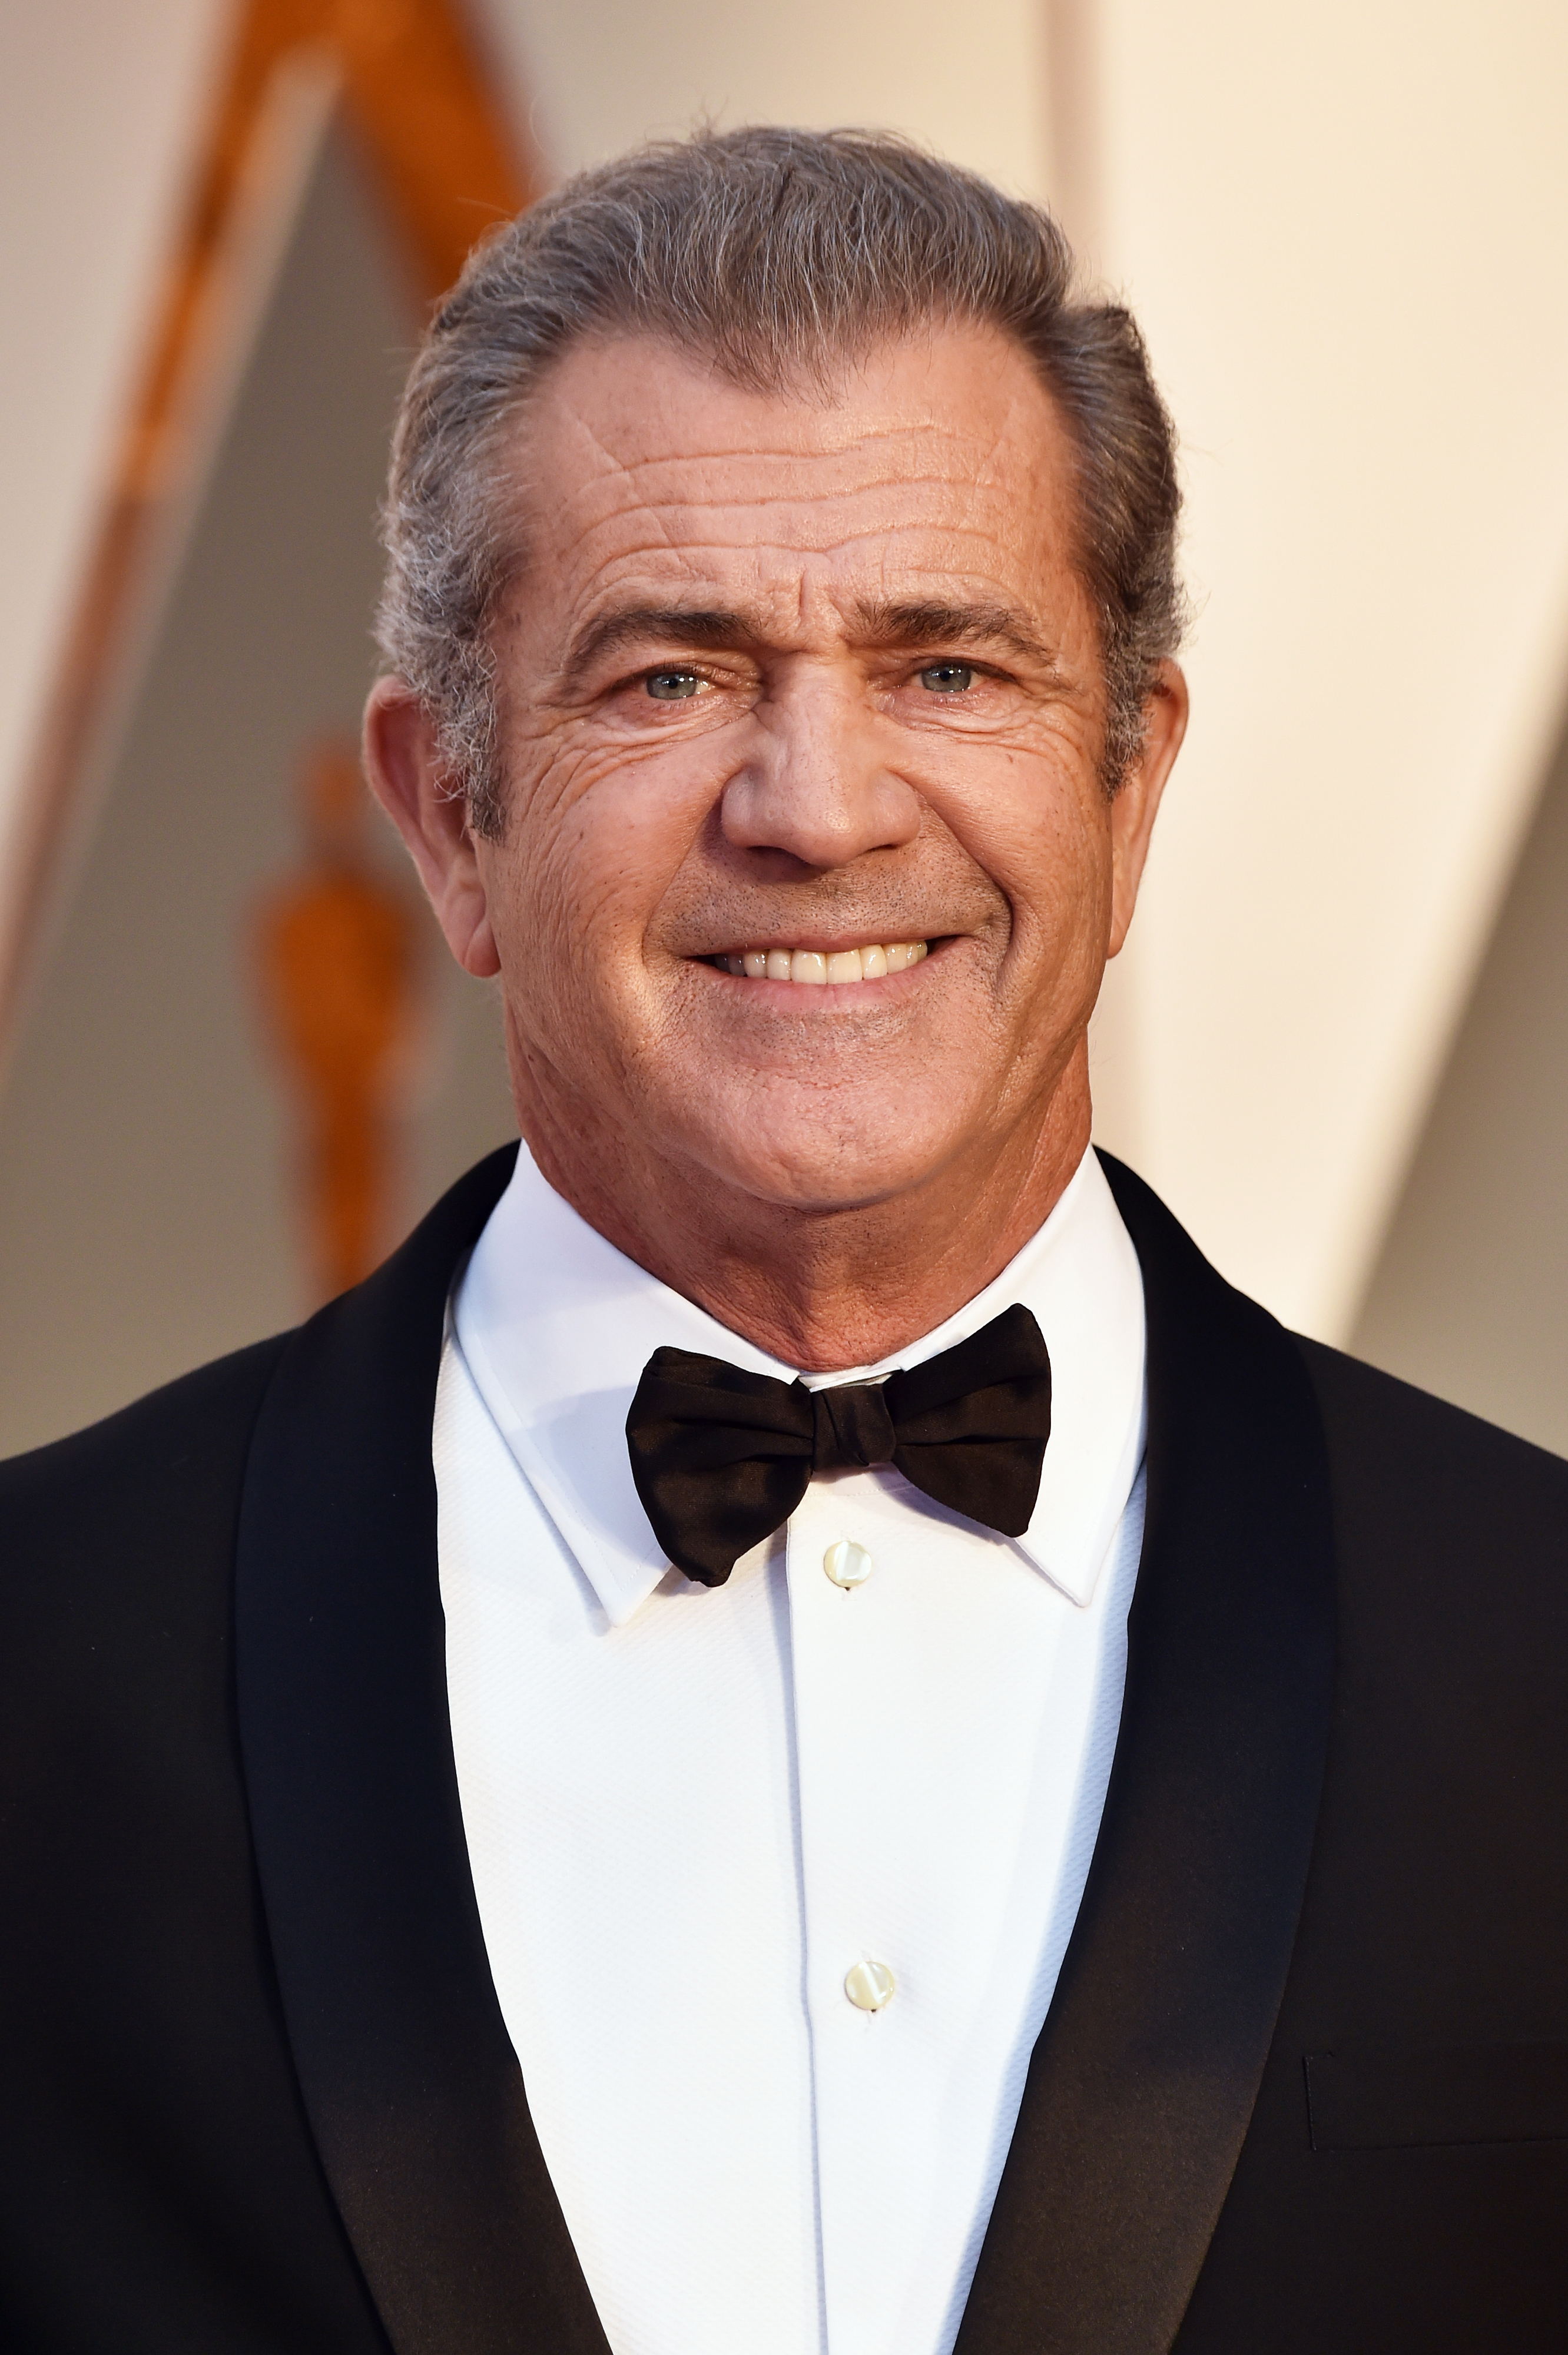 Actor/director Mel Gibson attends the 89th Annual Academy Awards at Hollywood & Highland Center on February 26, 2017, in Hollywood, California. | Source: Getty Images